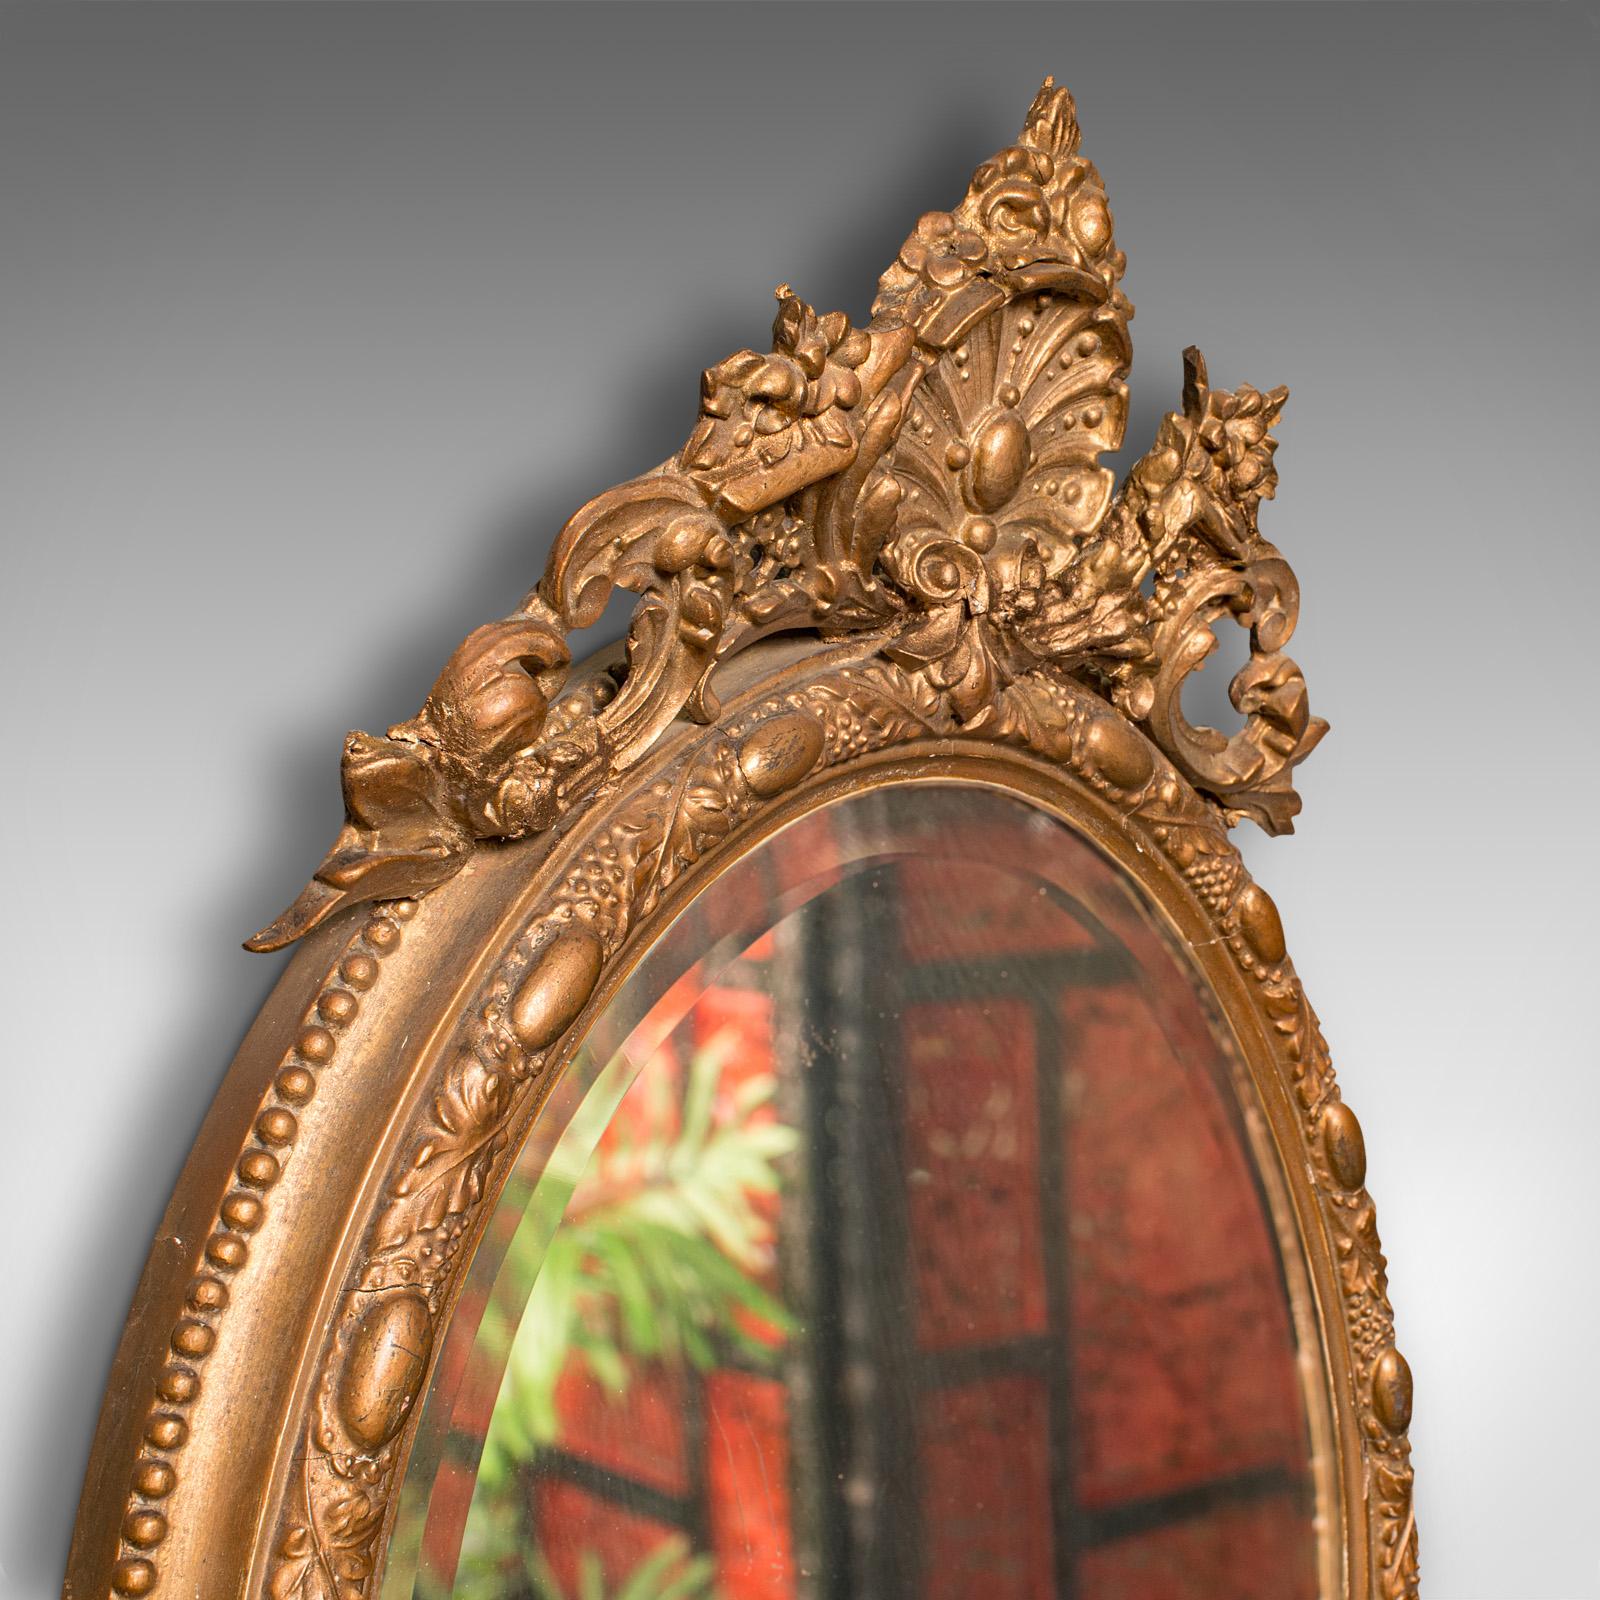 Antique Ornate Wall Mirror, French, Gilt Gesso, Bevelled Glass, Victorian, 1900 For Sale 1